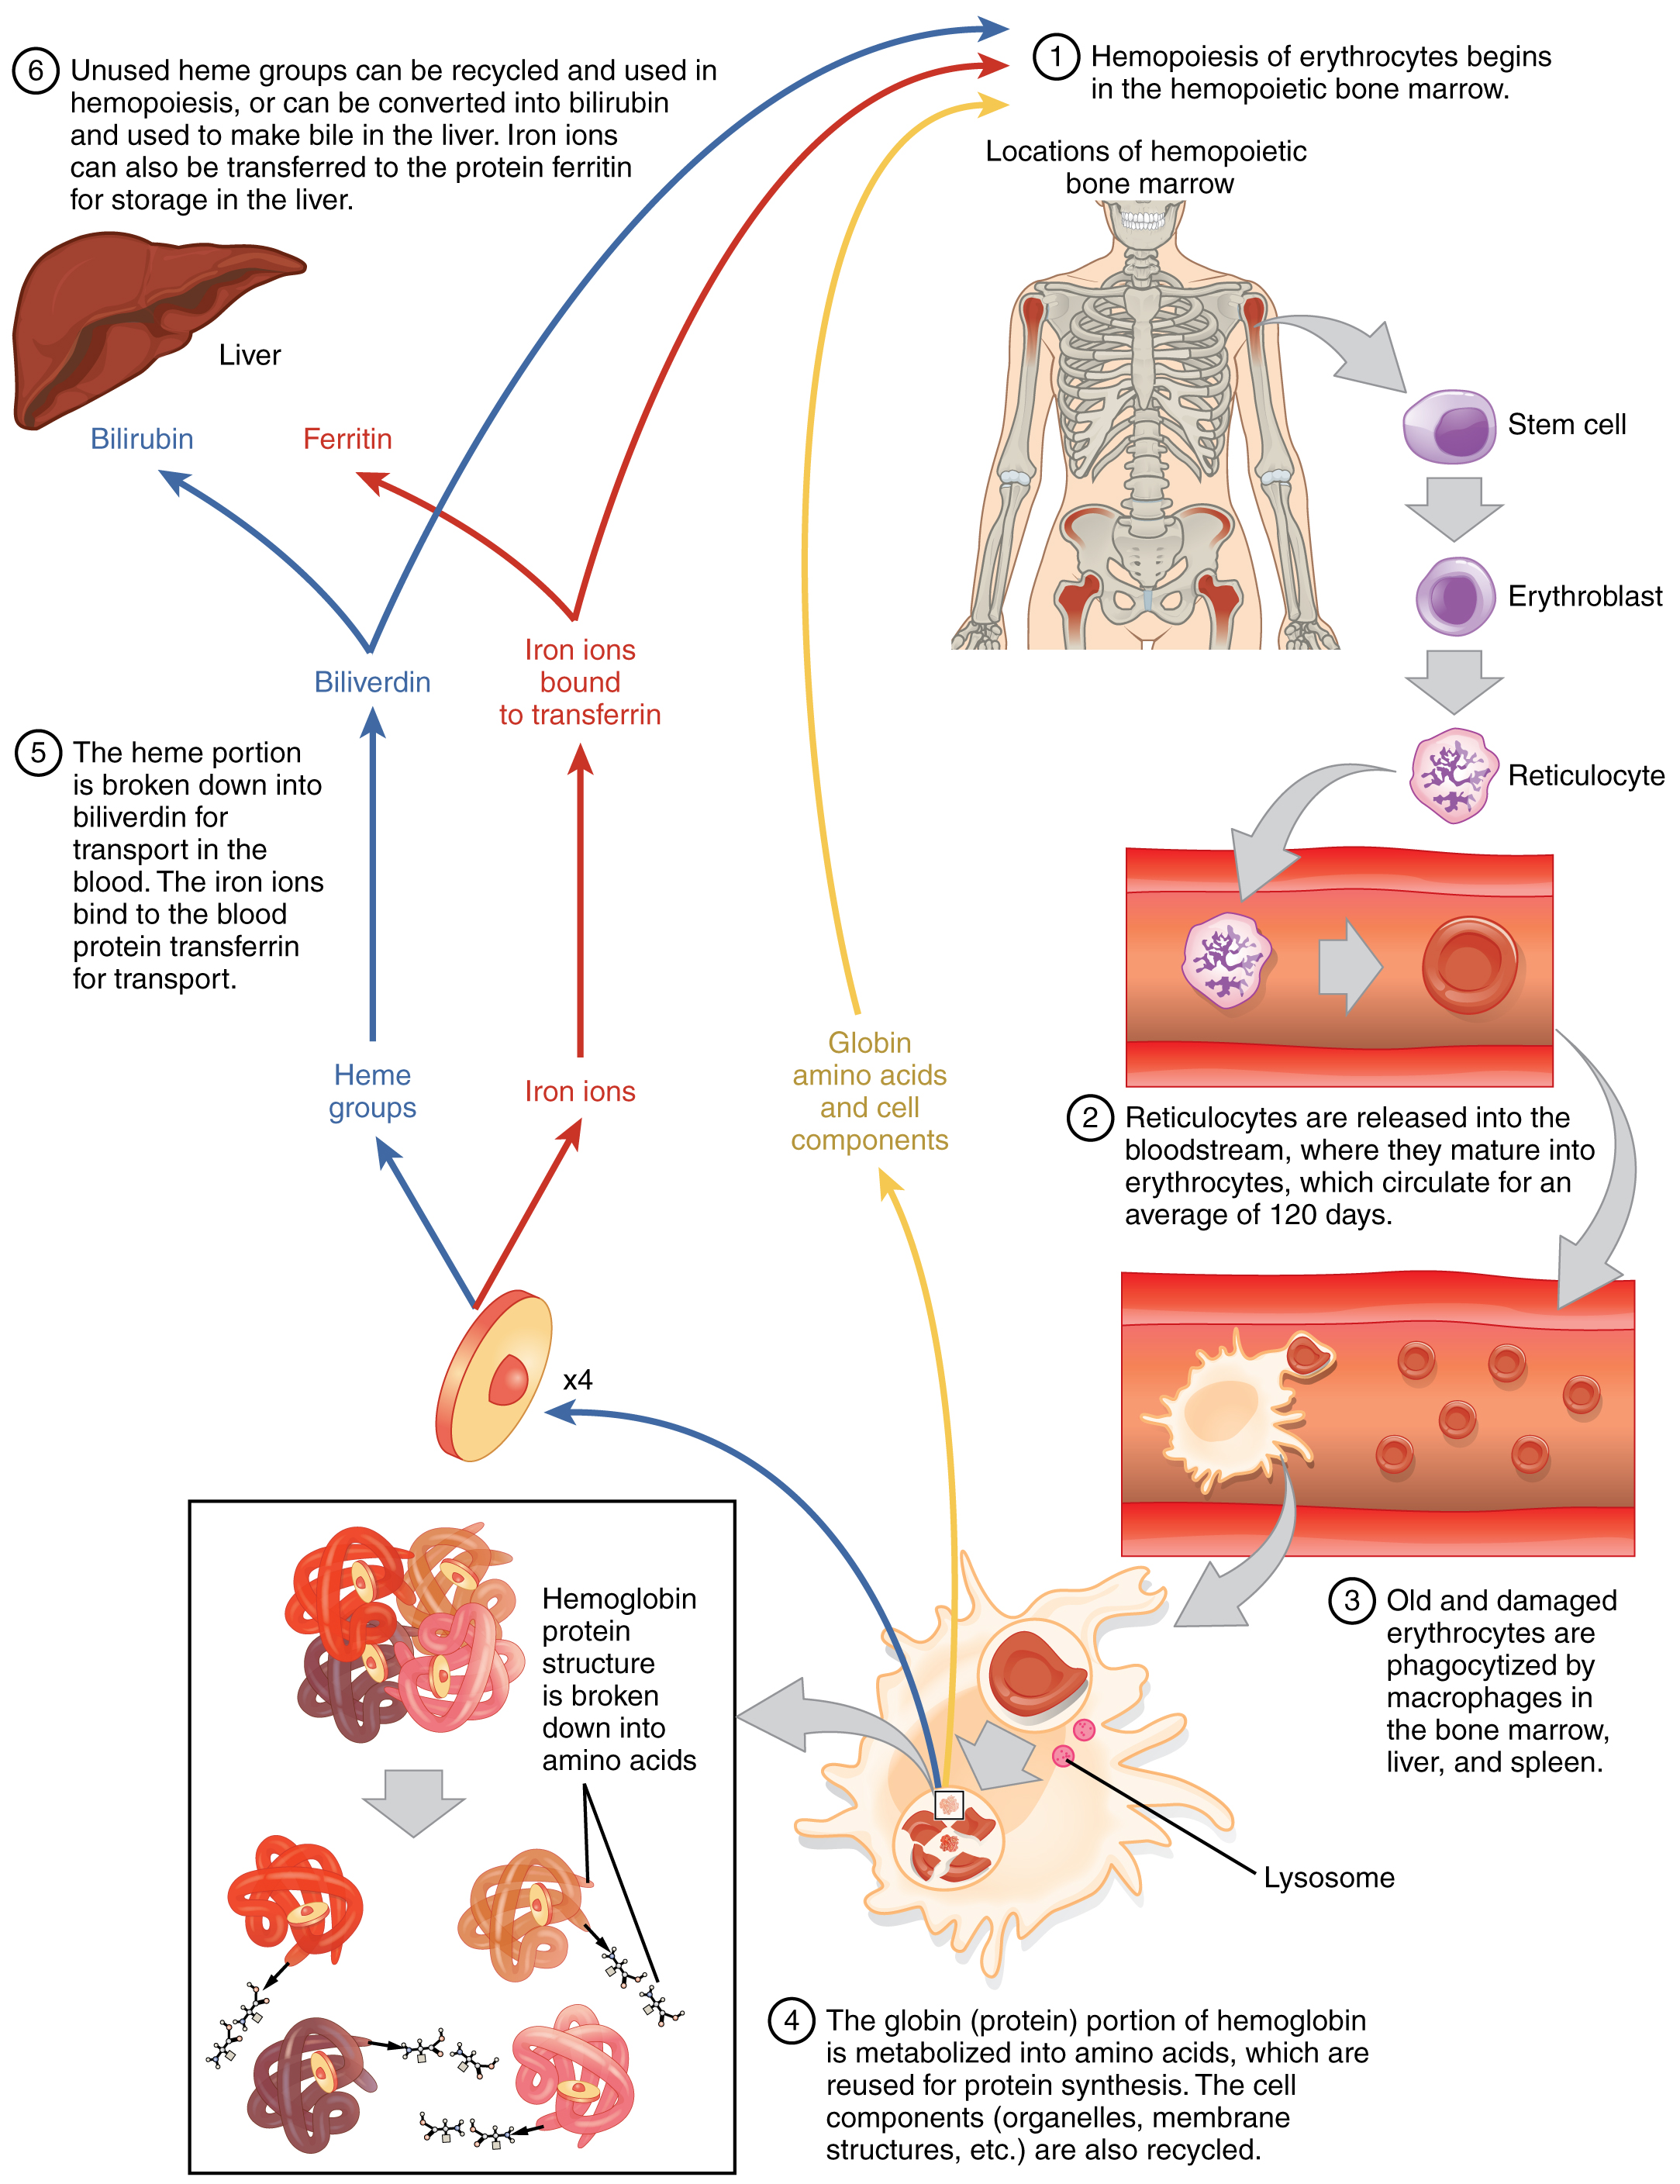 Flow diagram depicting the life cycle of a red blood cell.